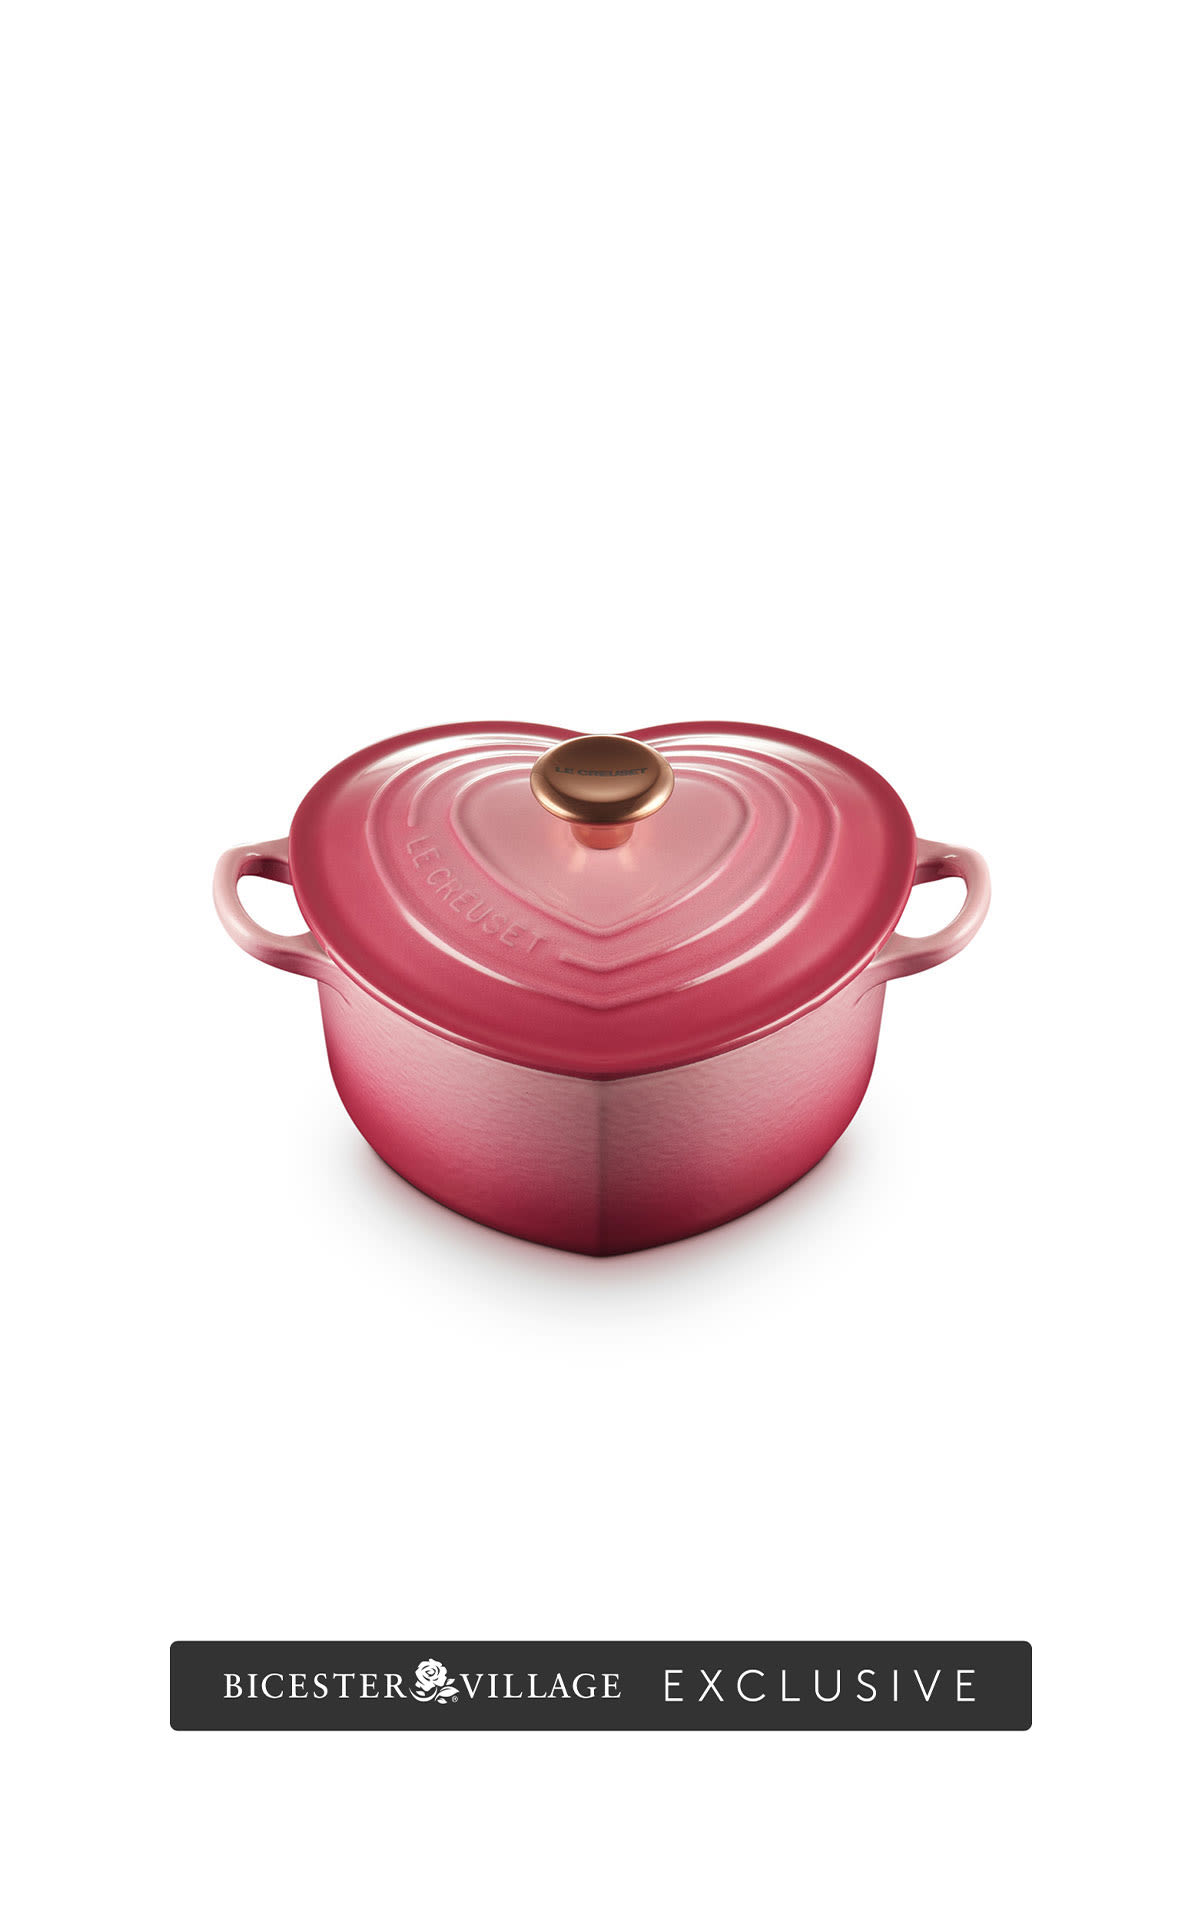 Le Creuset Heart casserole 20cm berry  from Bicester Village